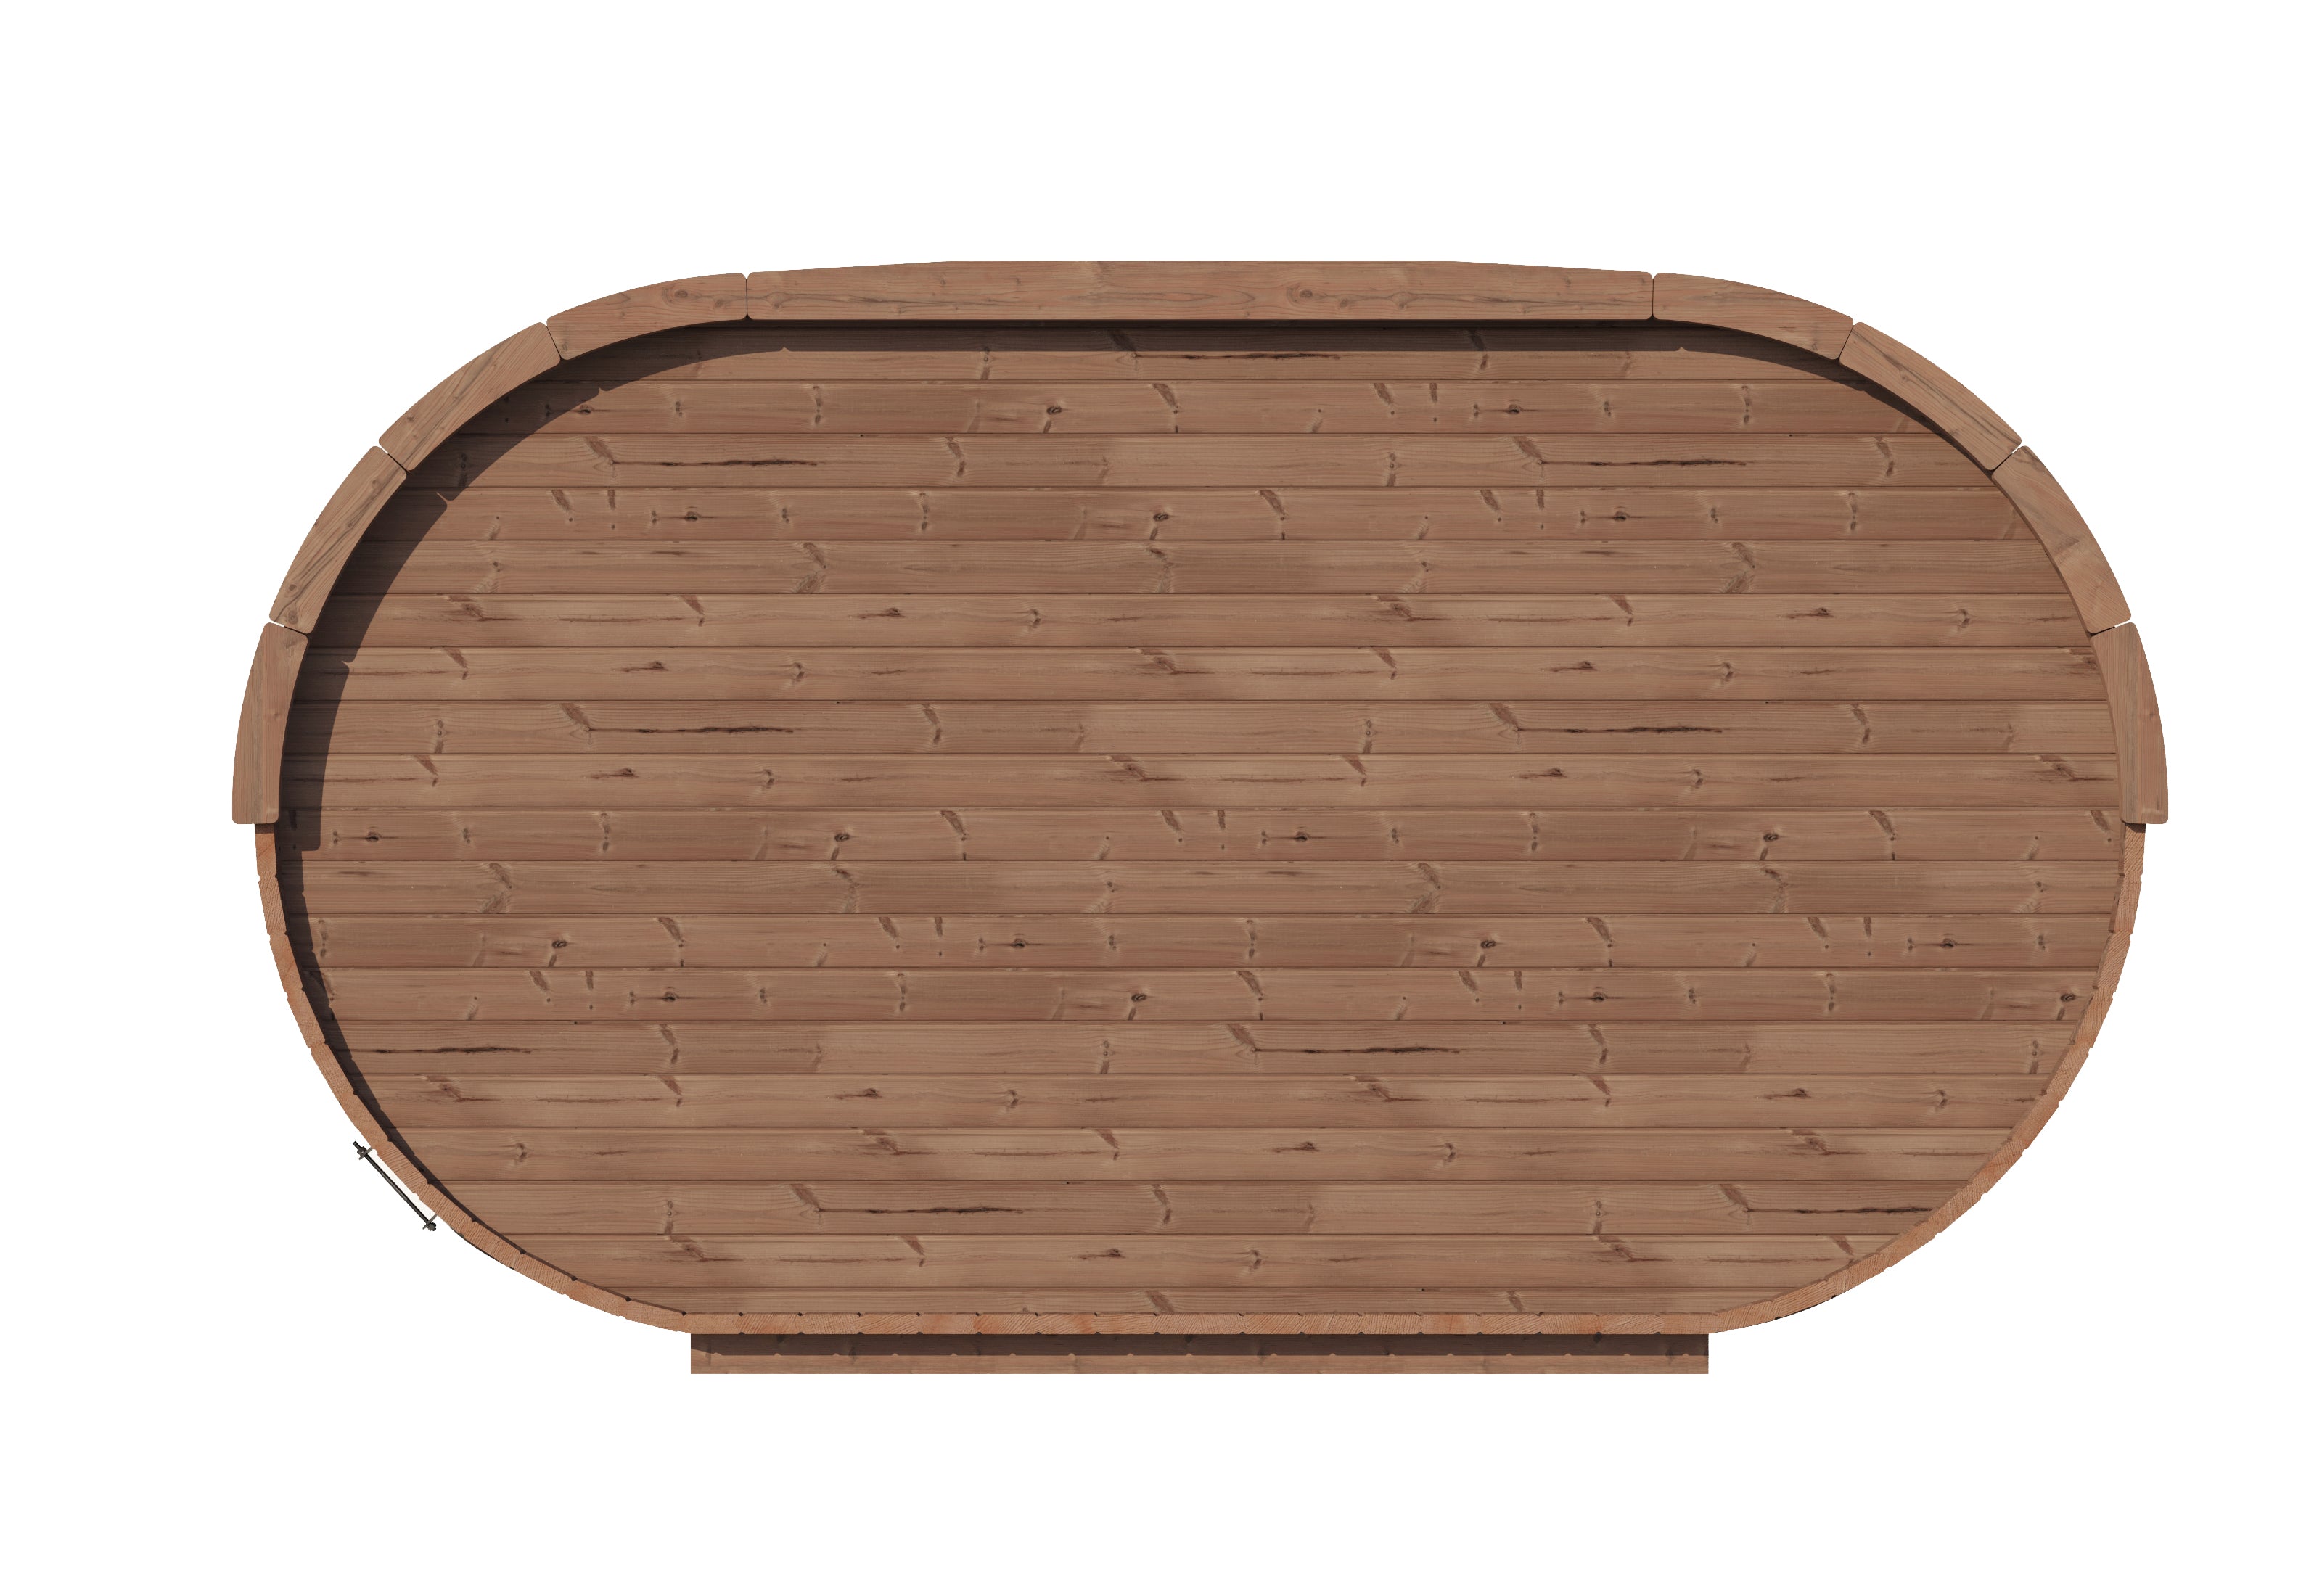 Glamping kućica Camping Oval 400 thermowood